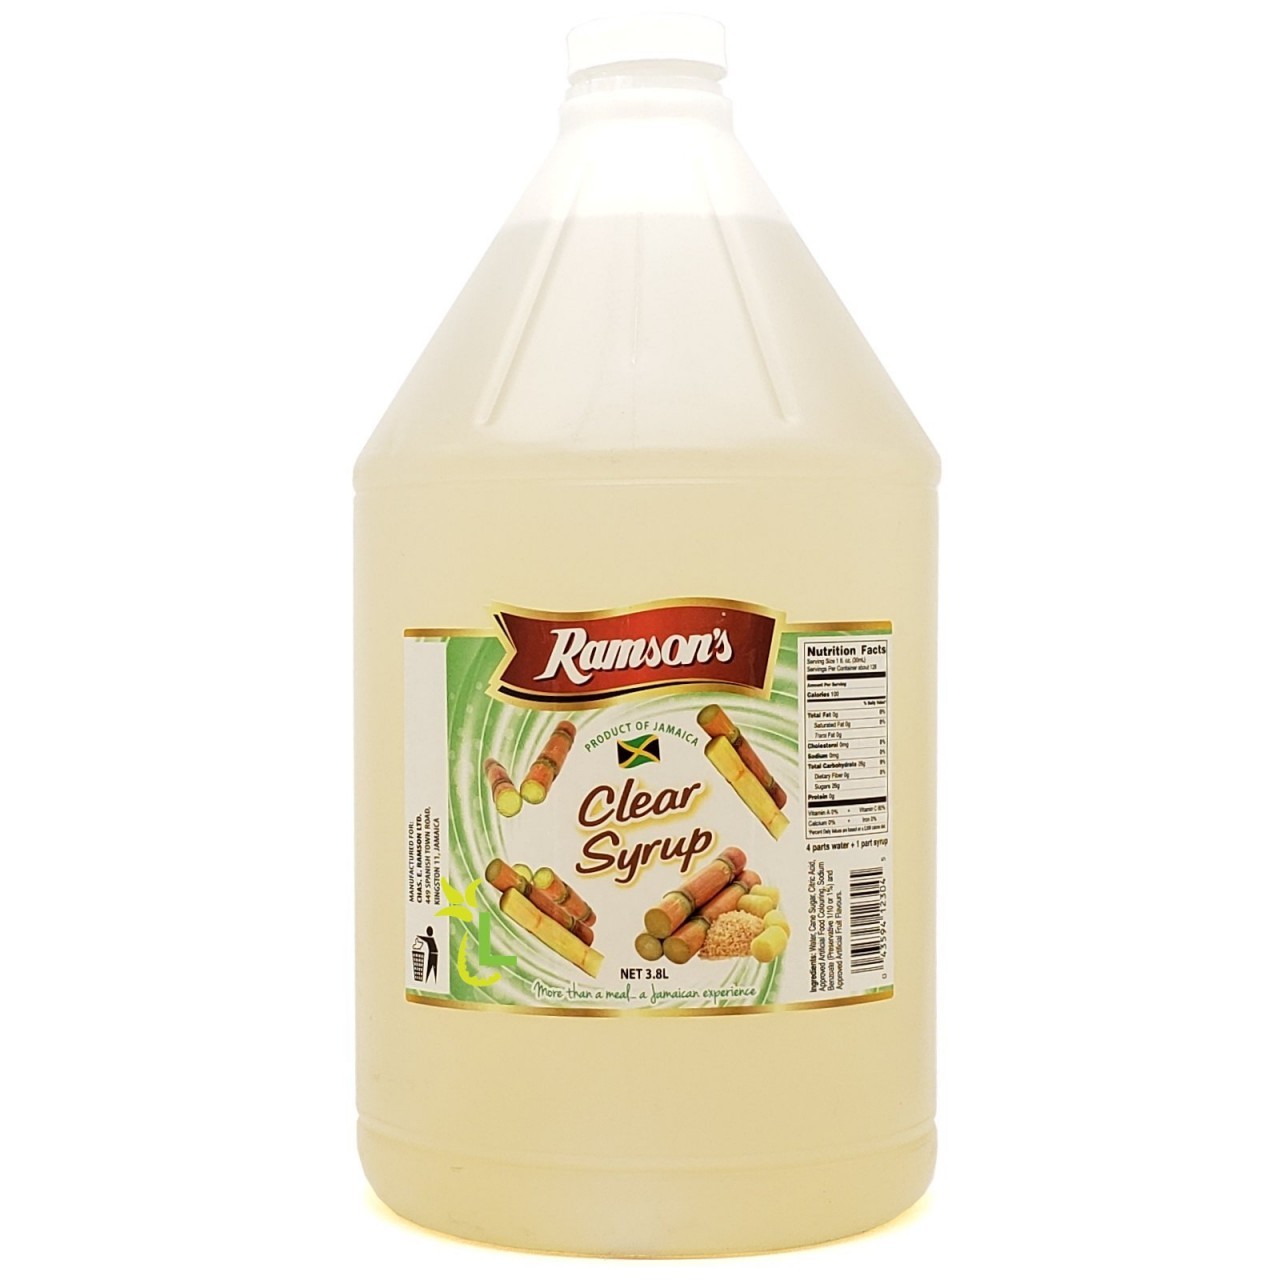 RAMSONS SYRUP CLEAR 3.8L